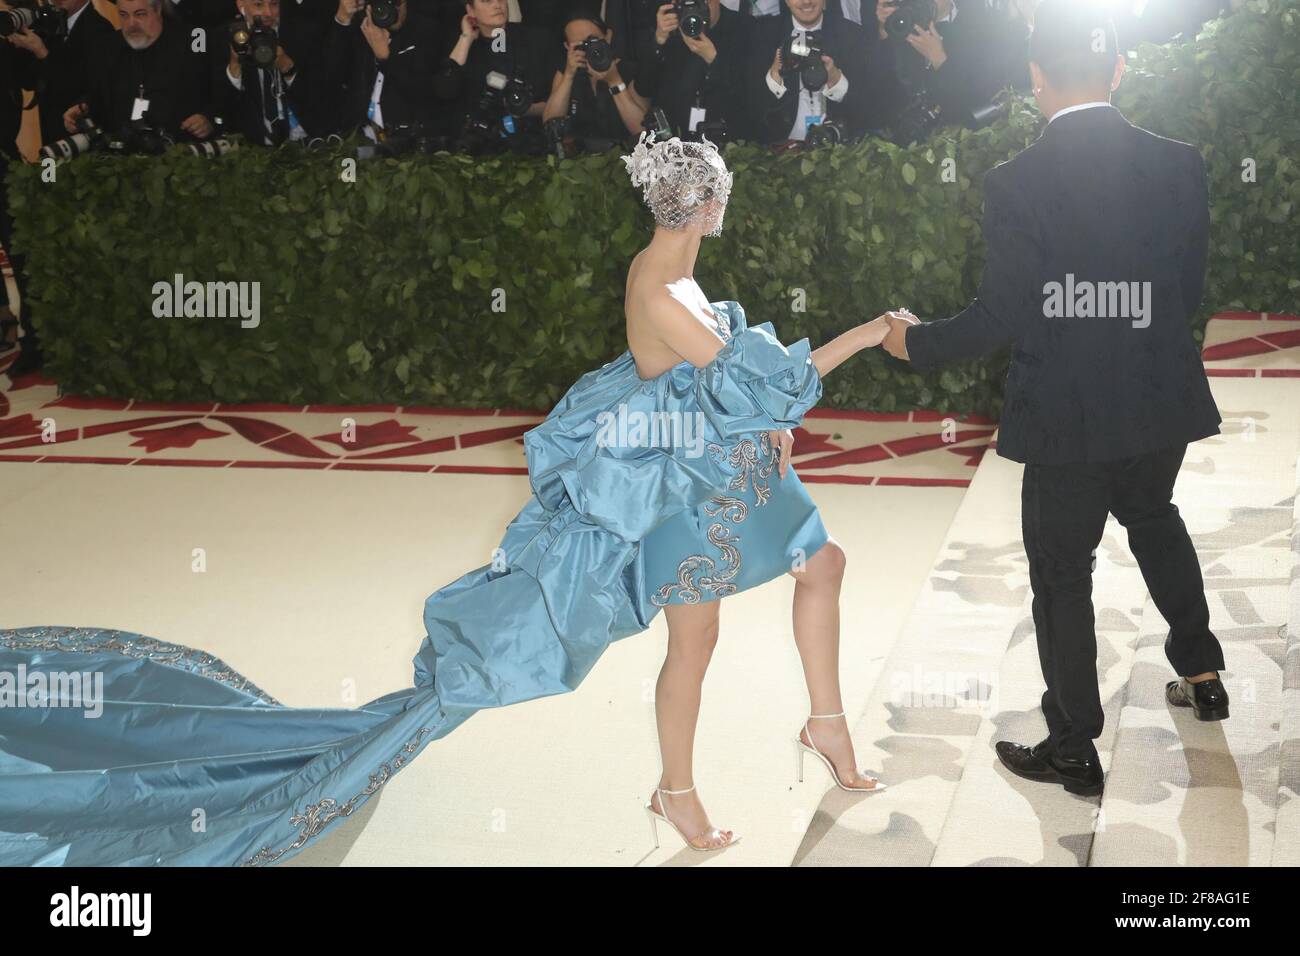 Diane Kruger arrives to the 2018 Met Costume Gala Heavenly Bodies, held at the Metropolitan Museum of Art in New York City, Monday, May 7, 2018. Photo by Jennifer Graylock-Graylock.com 917-519-7666 Stock Photo